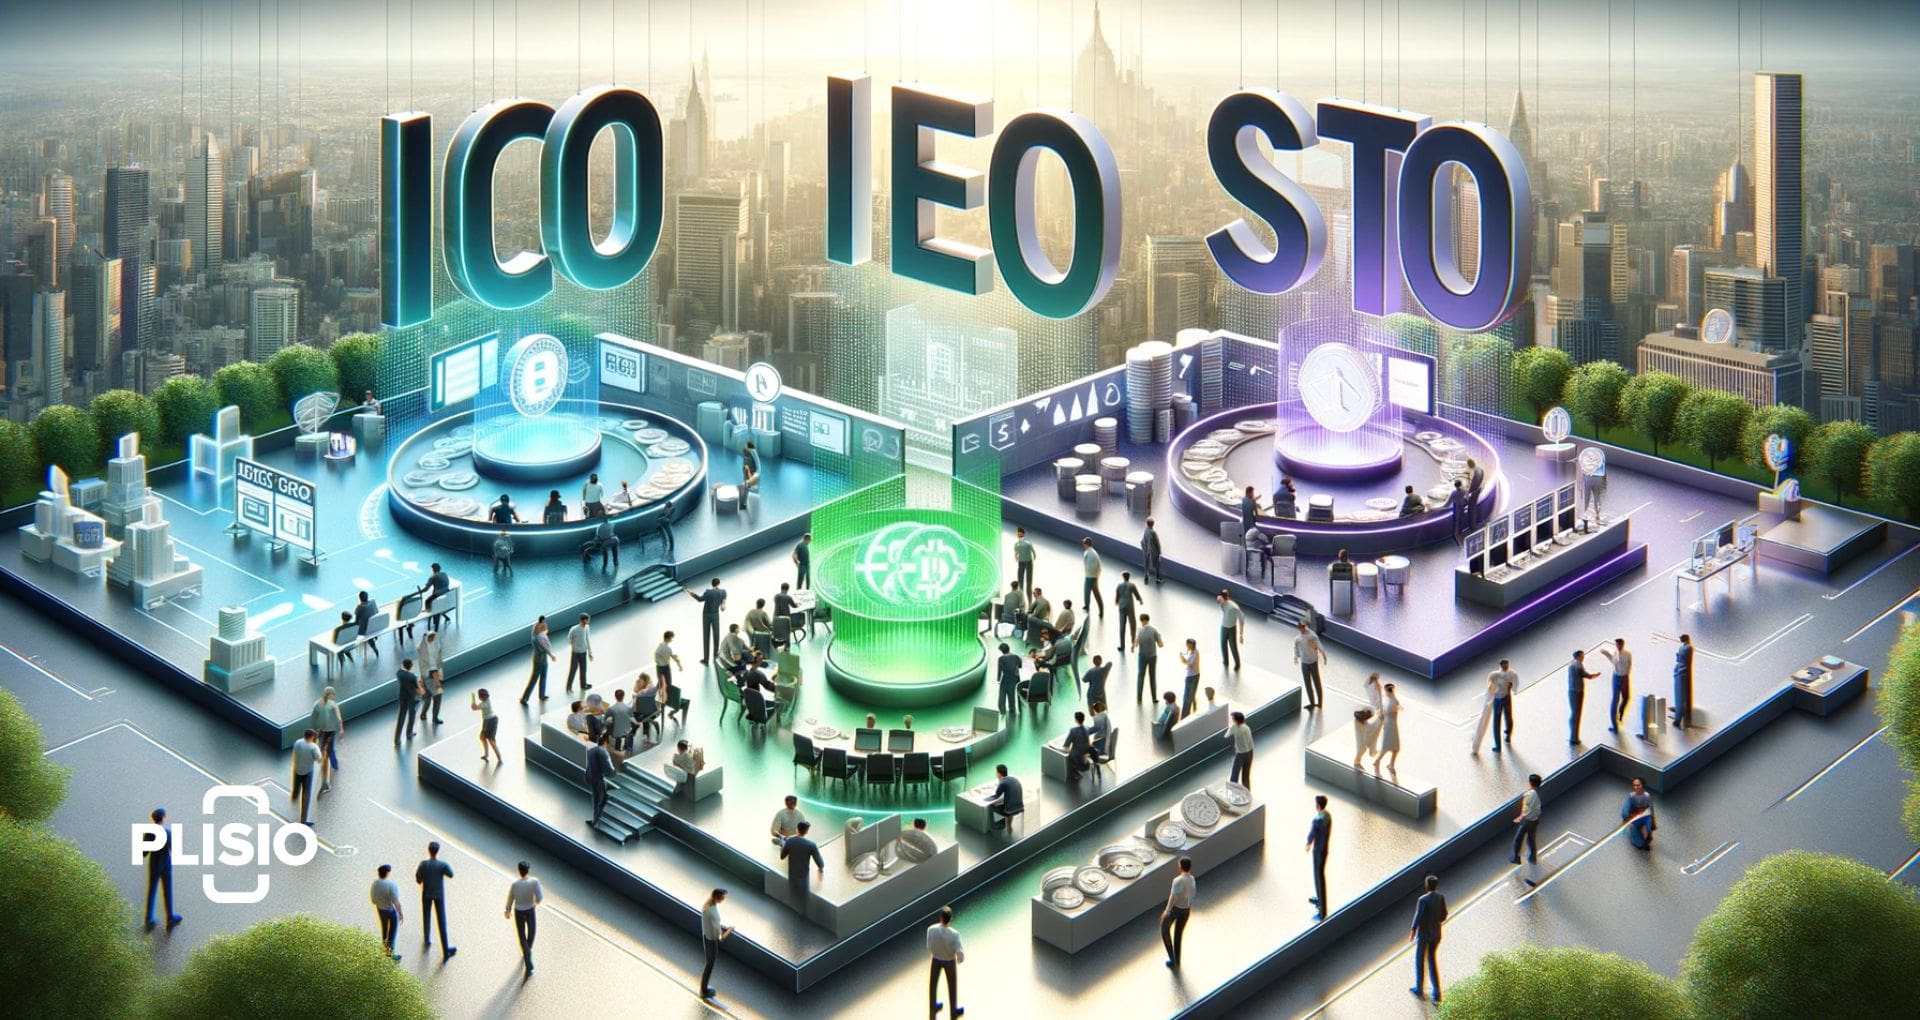 What are Differences between ICO, IEO, and STO?